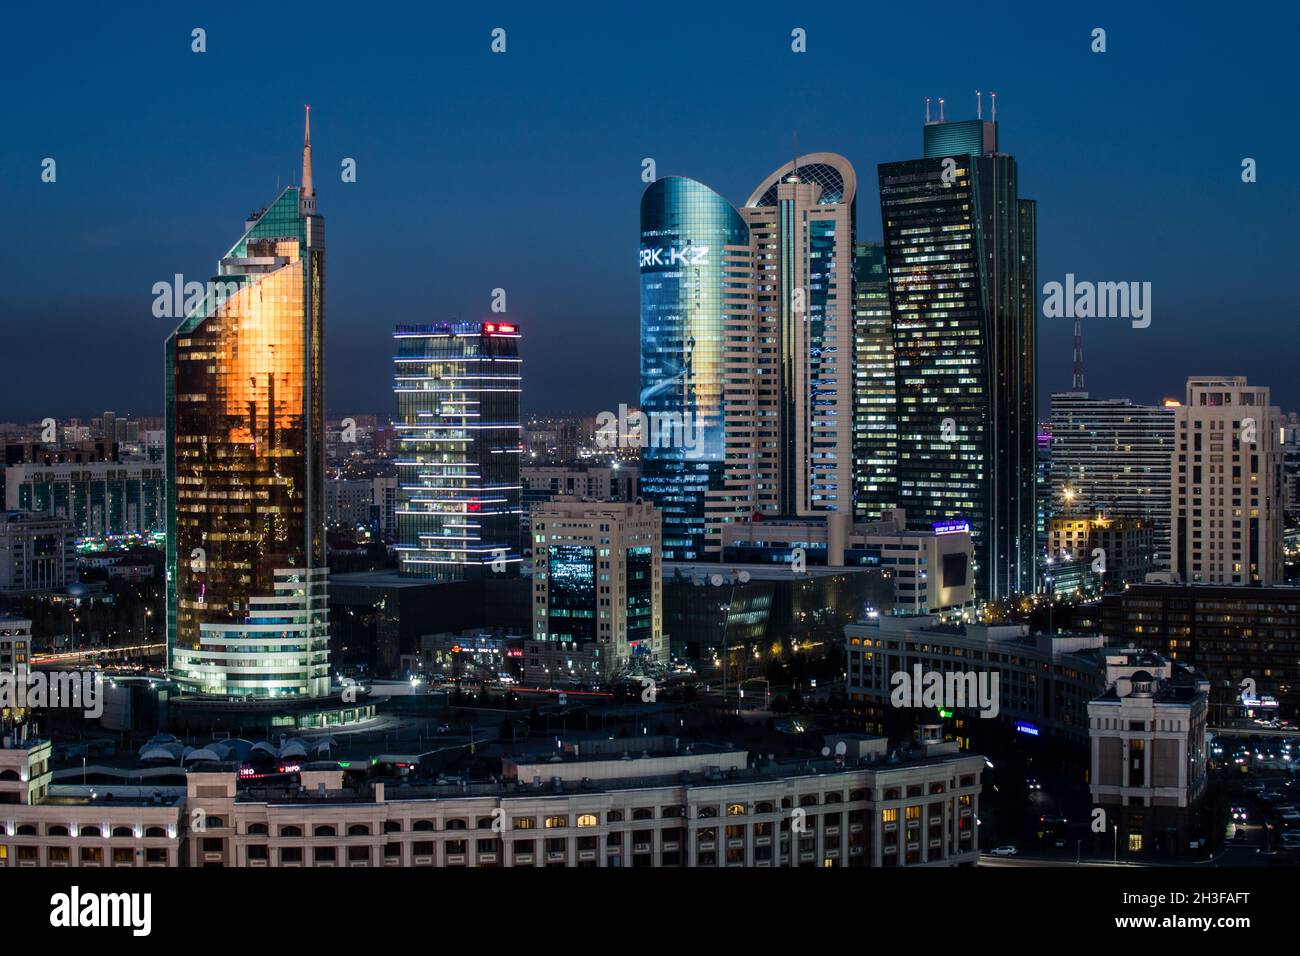 Scenes from Nur-Sultan (formerly Astana), capital city of Kazakhstan in Central Asia. Stock Photo